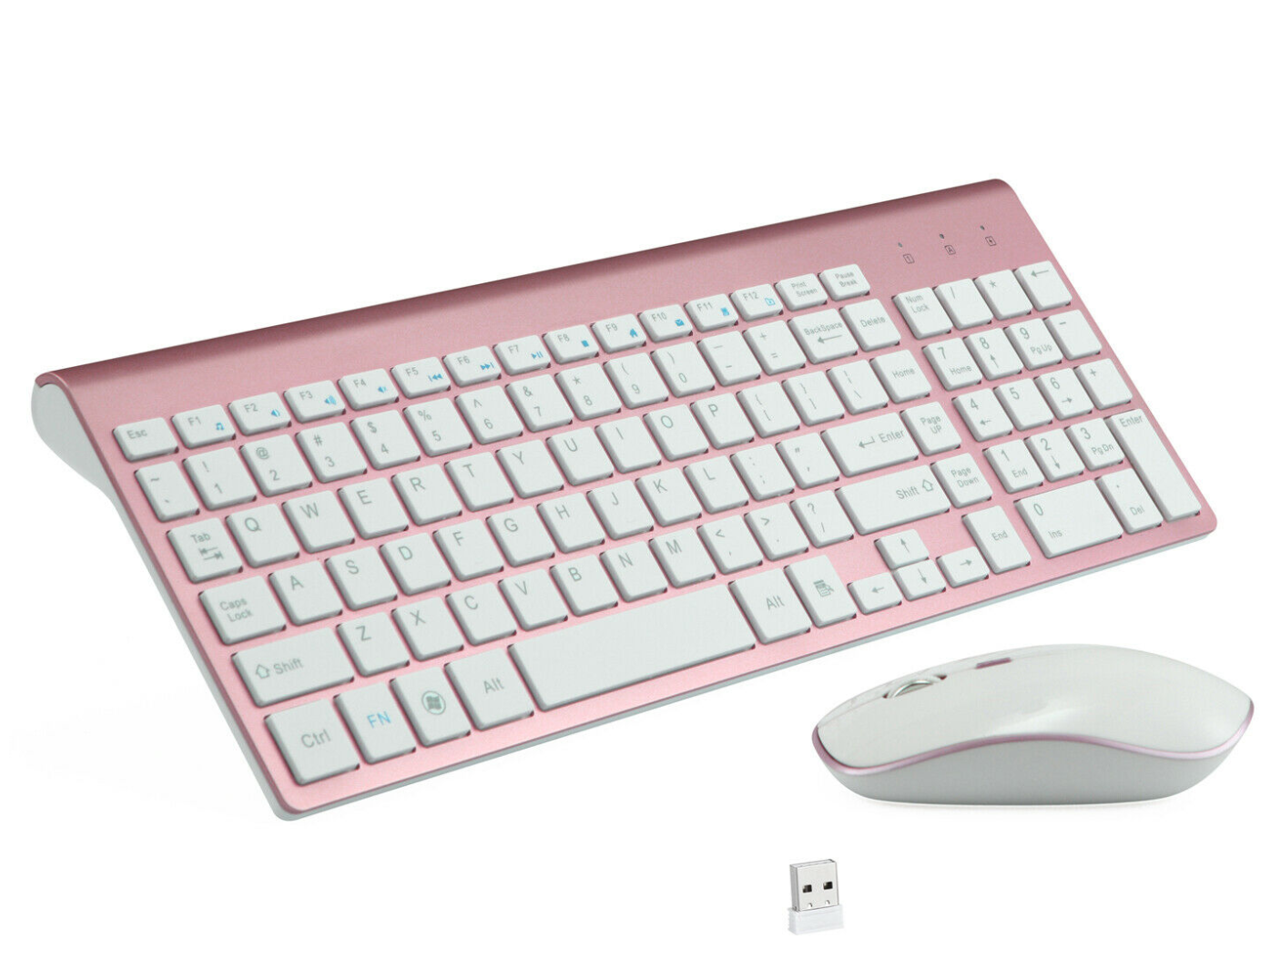 Wireless Keyboard And Mouse Combo Set 2.4G For Apple iMac And PC Full ...